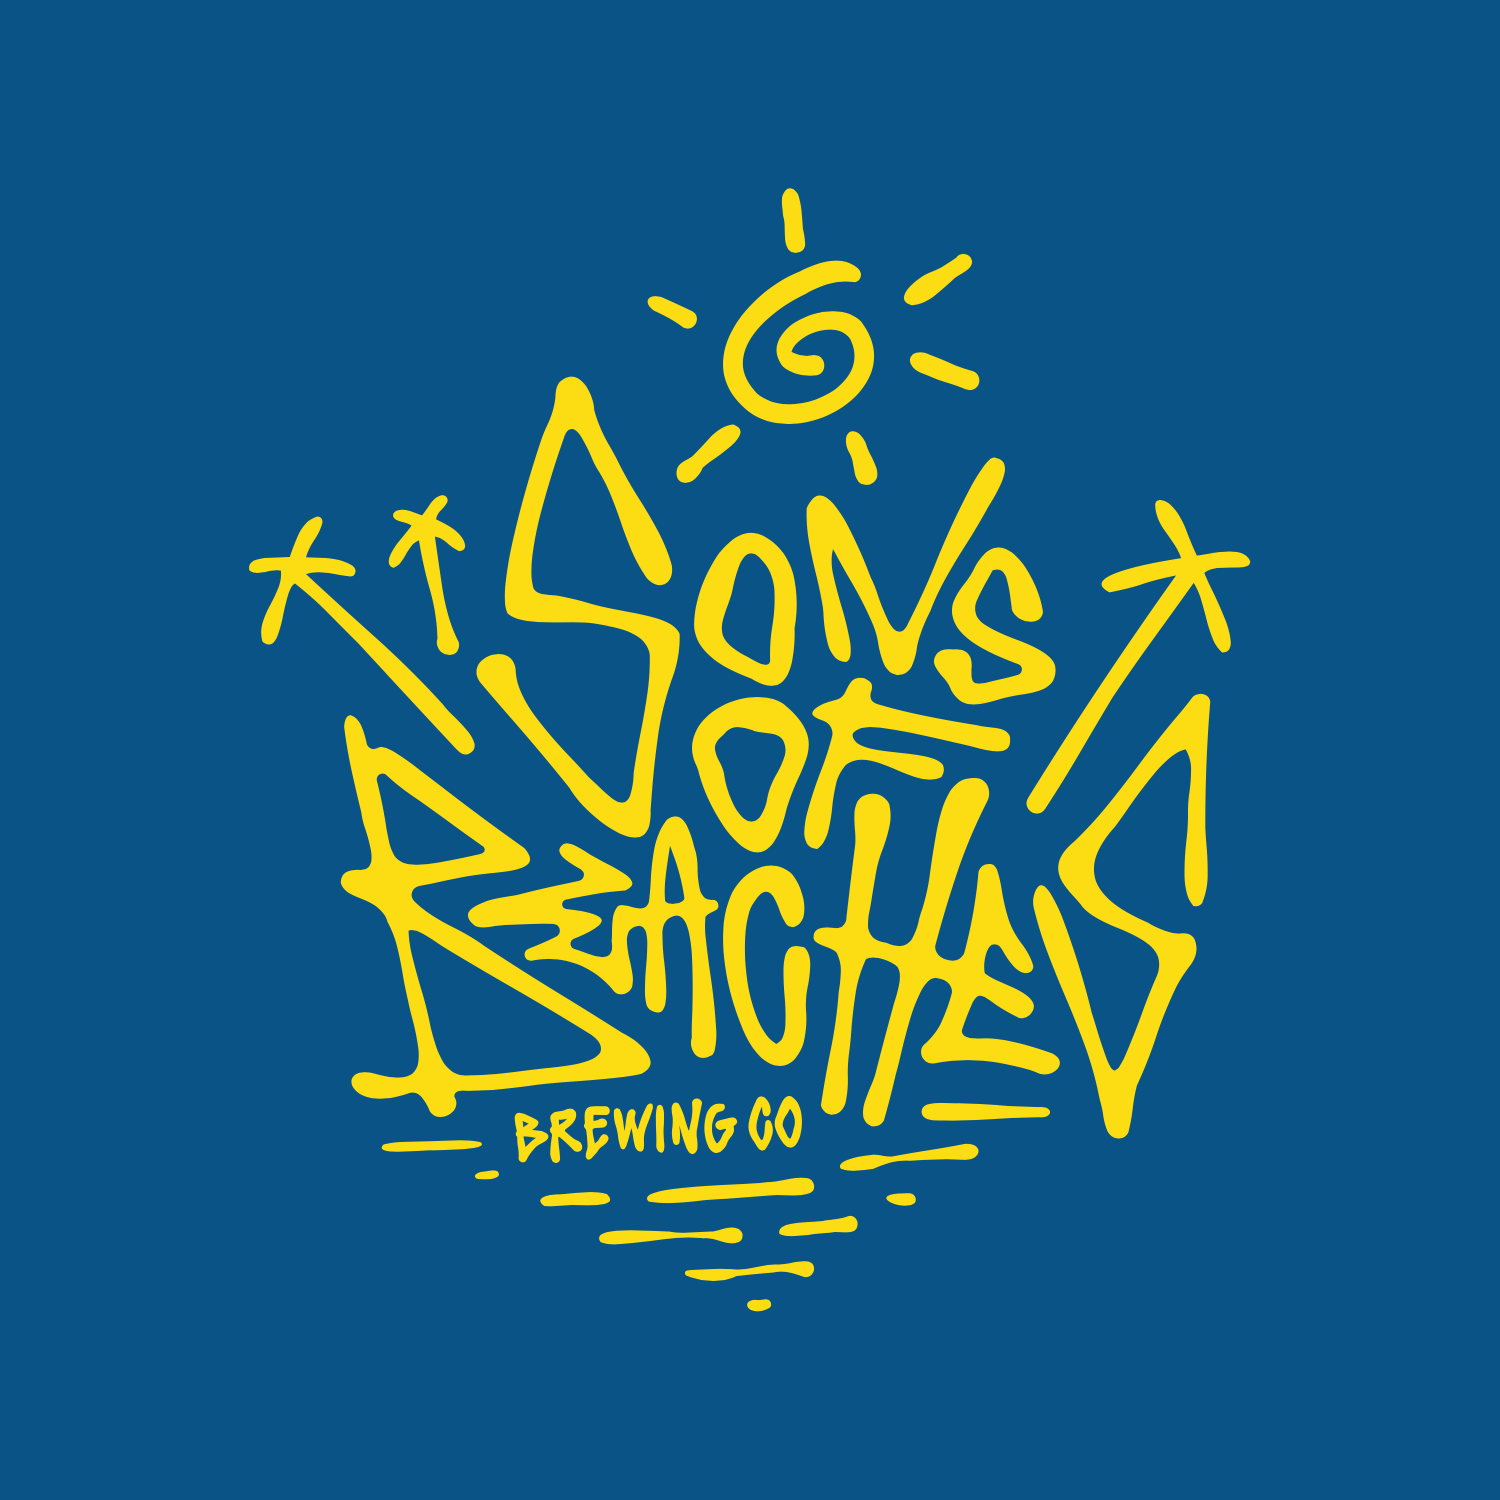 sons of beaches brewing logo.png